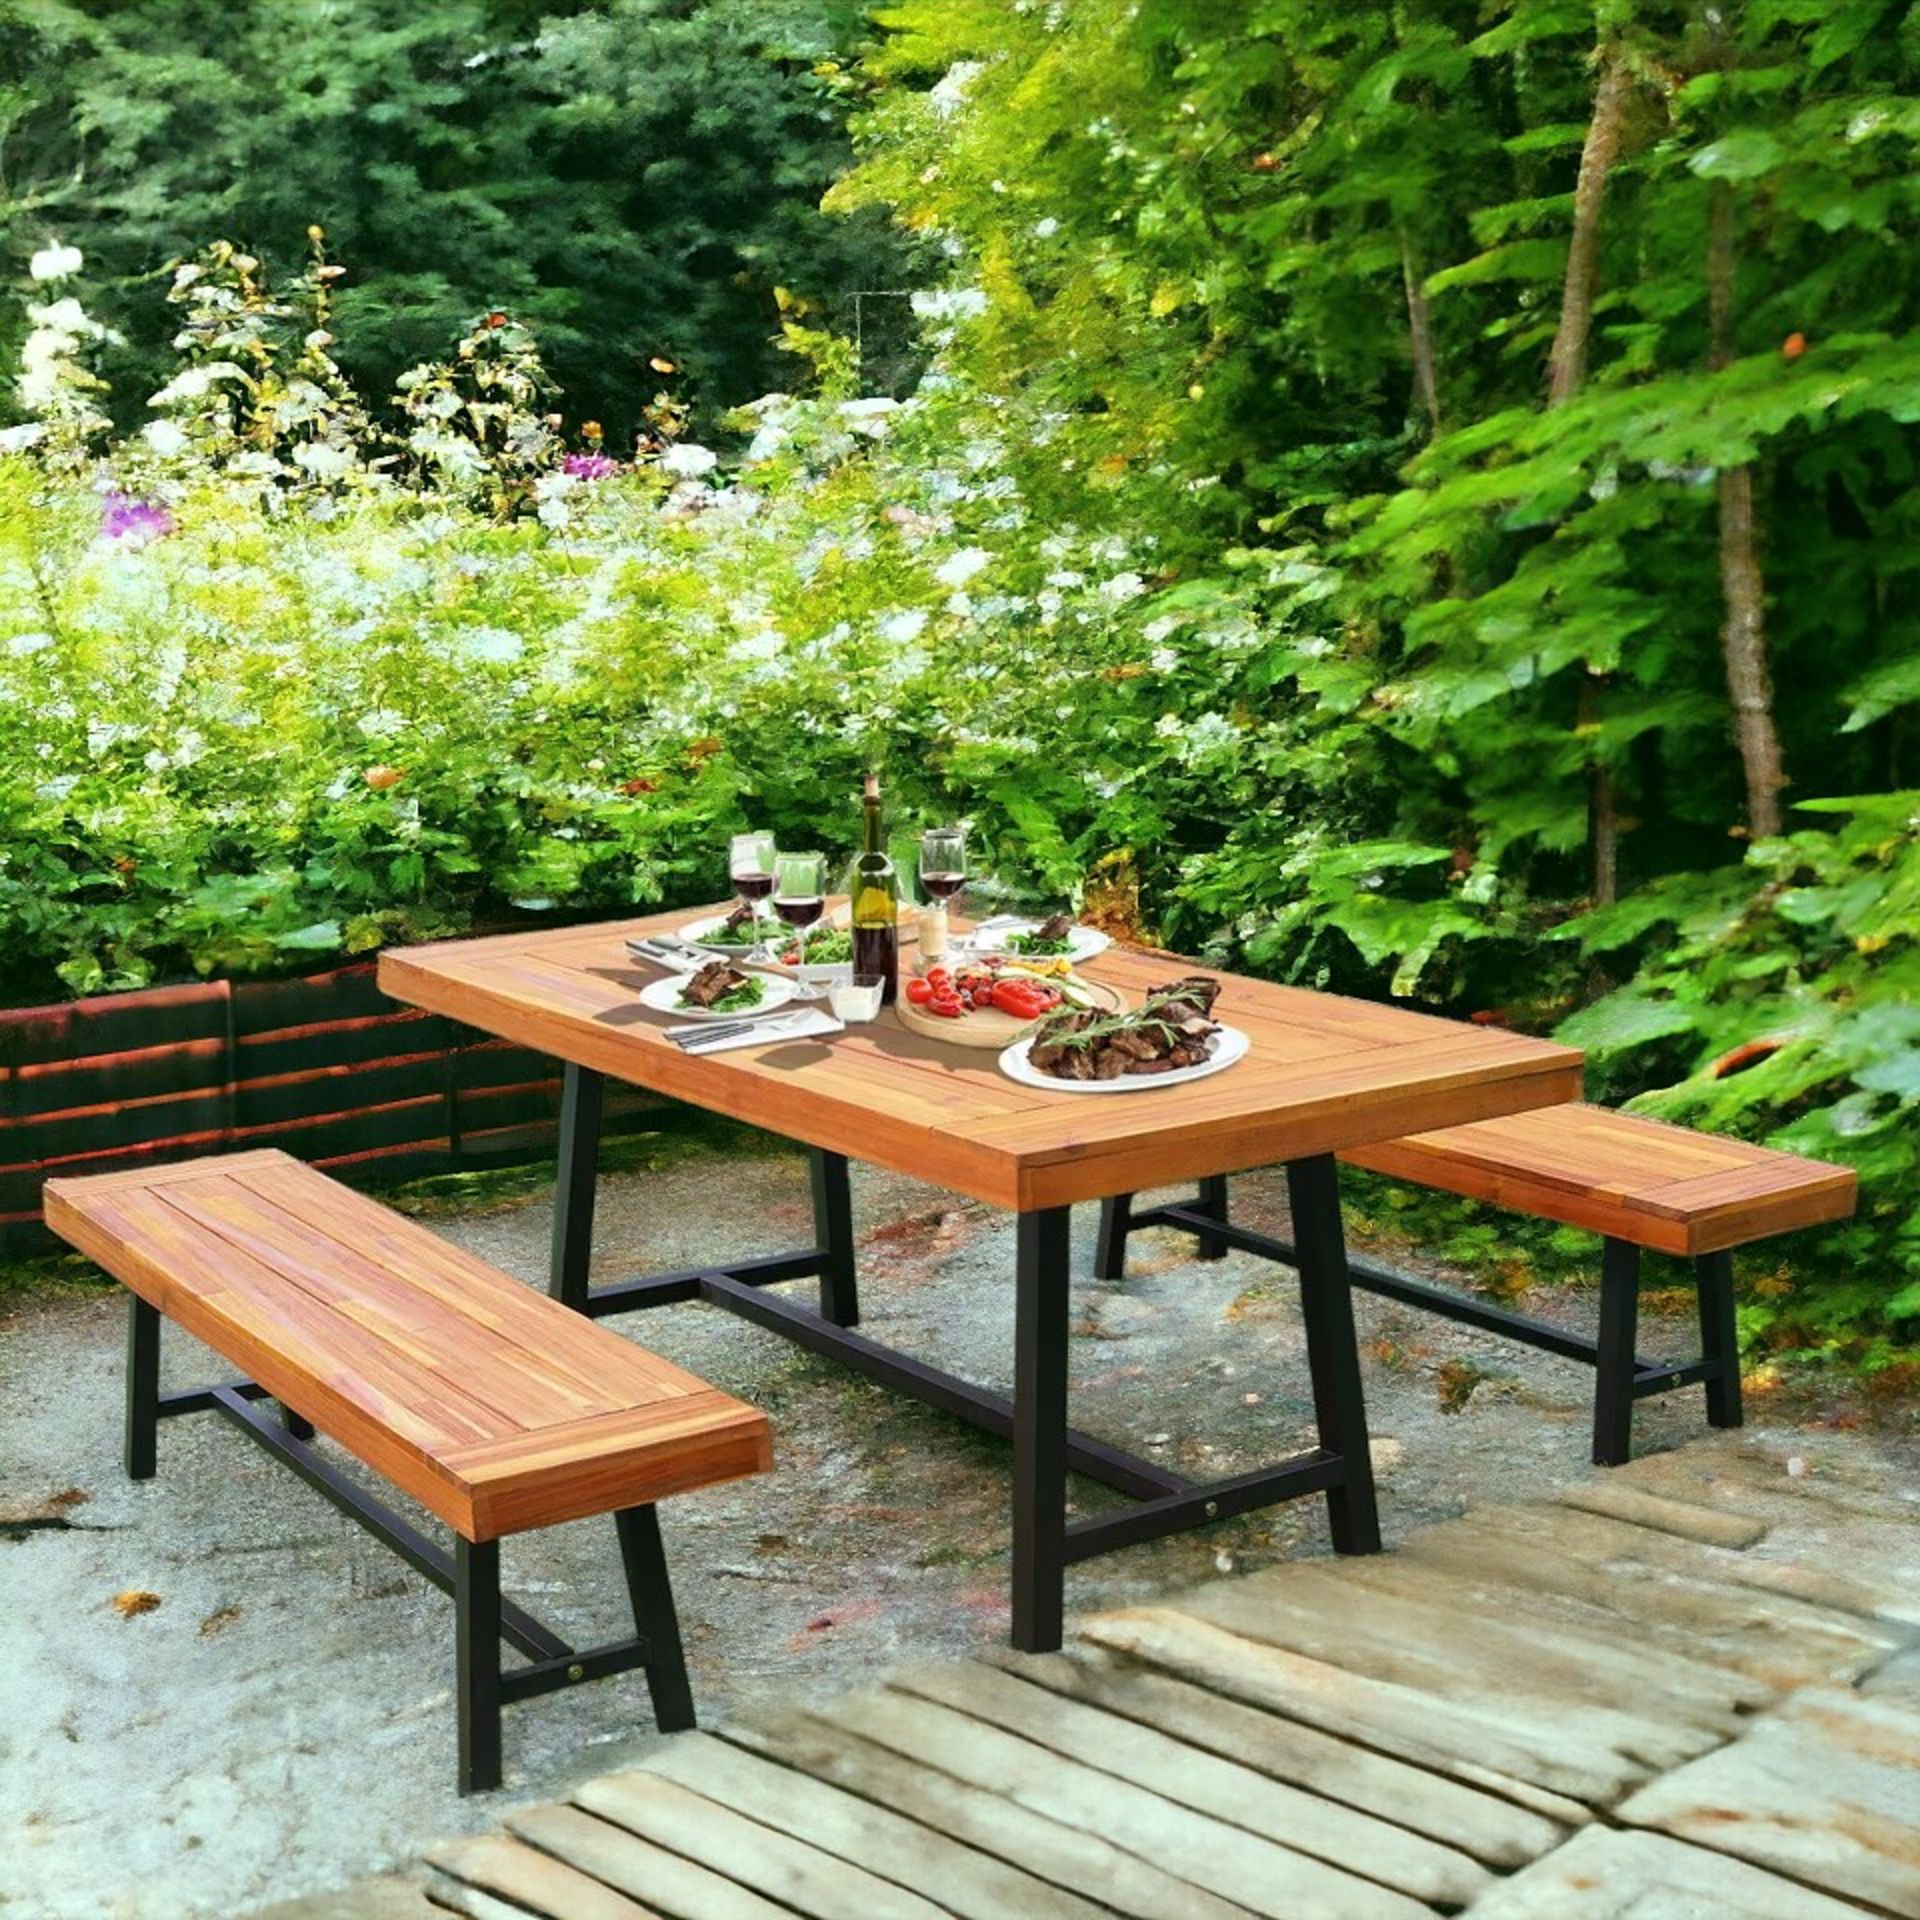 FREE DELIVERY - BRAND NEW 3 PIECES ACACIA WOOD PICNIC DINING SET OUTDOOR INDOOR FURNITURE NATURAL